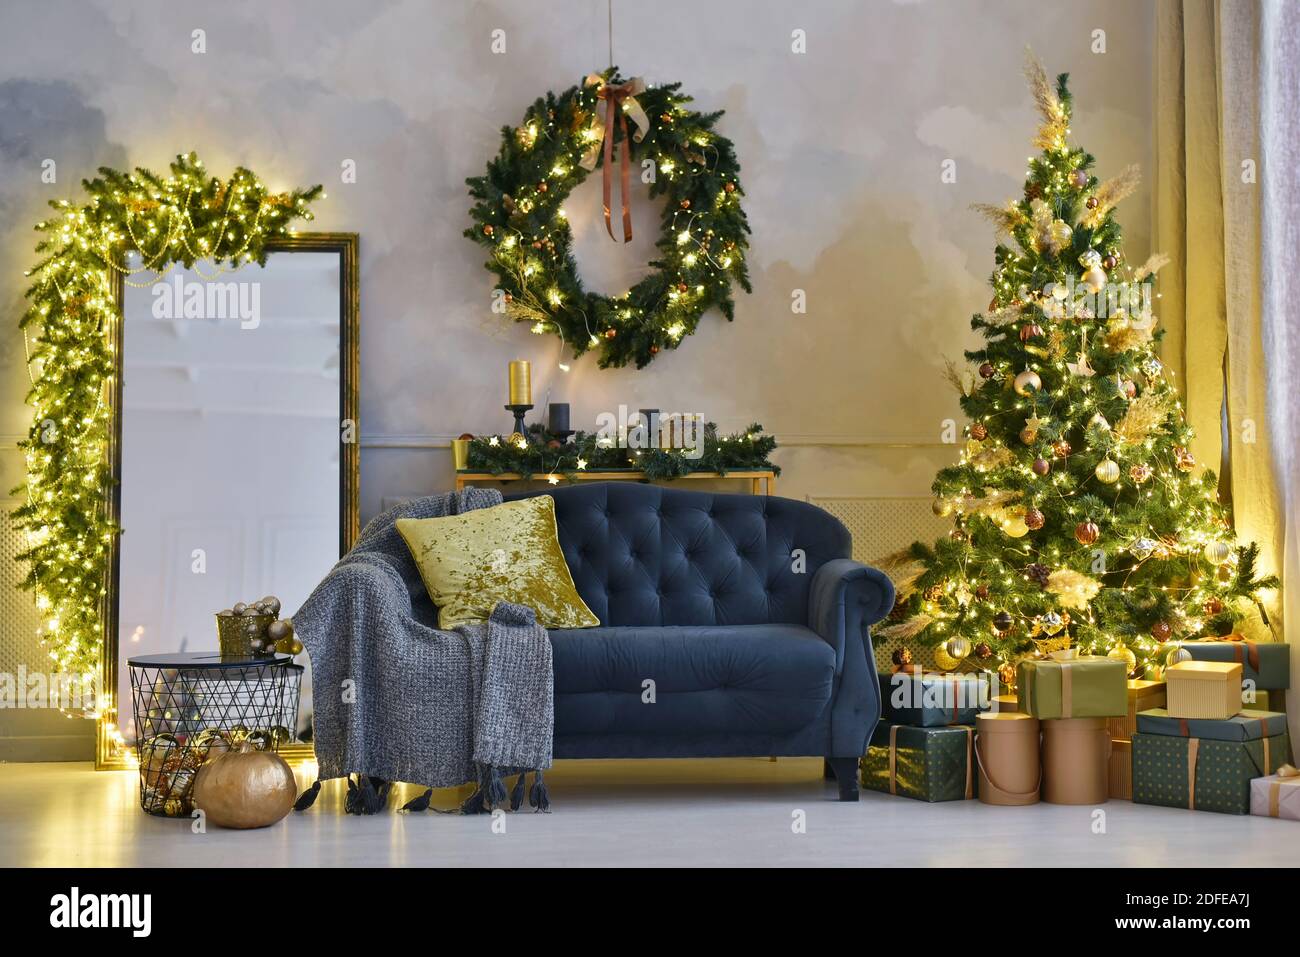 Christmas living room interior in gold colour Stock Photo